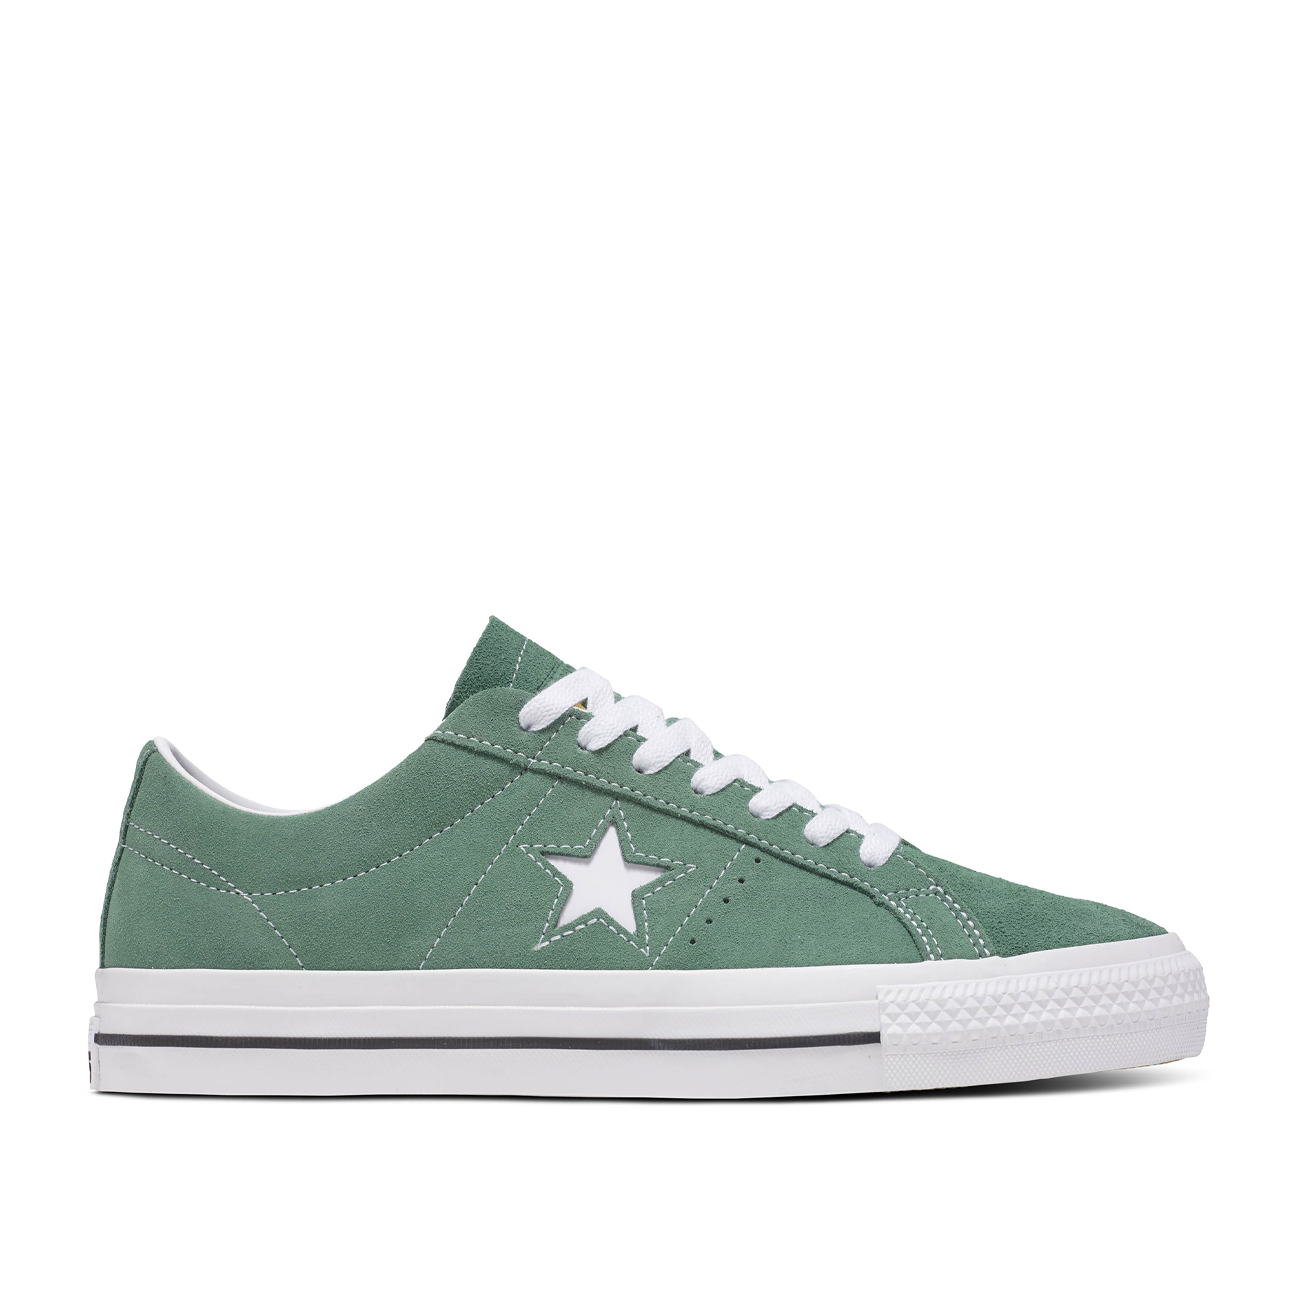 Converse Cons One Star Pro Sneakers in Admiral Elm/White/Blacks - A07618C